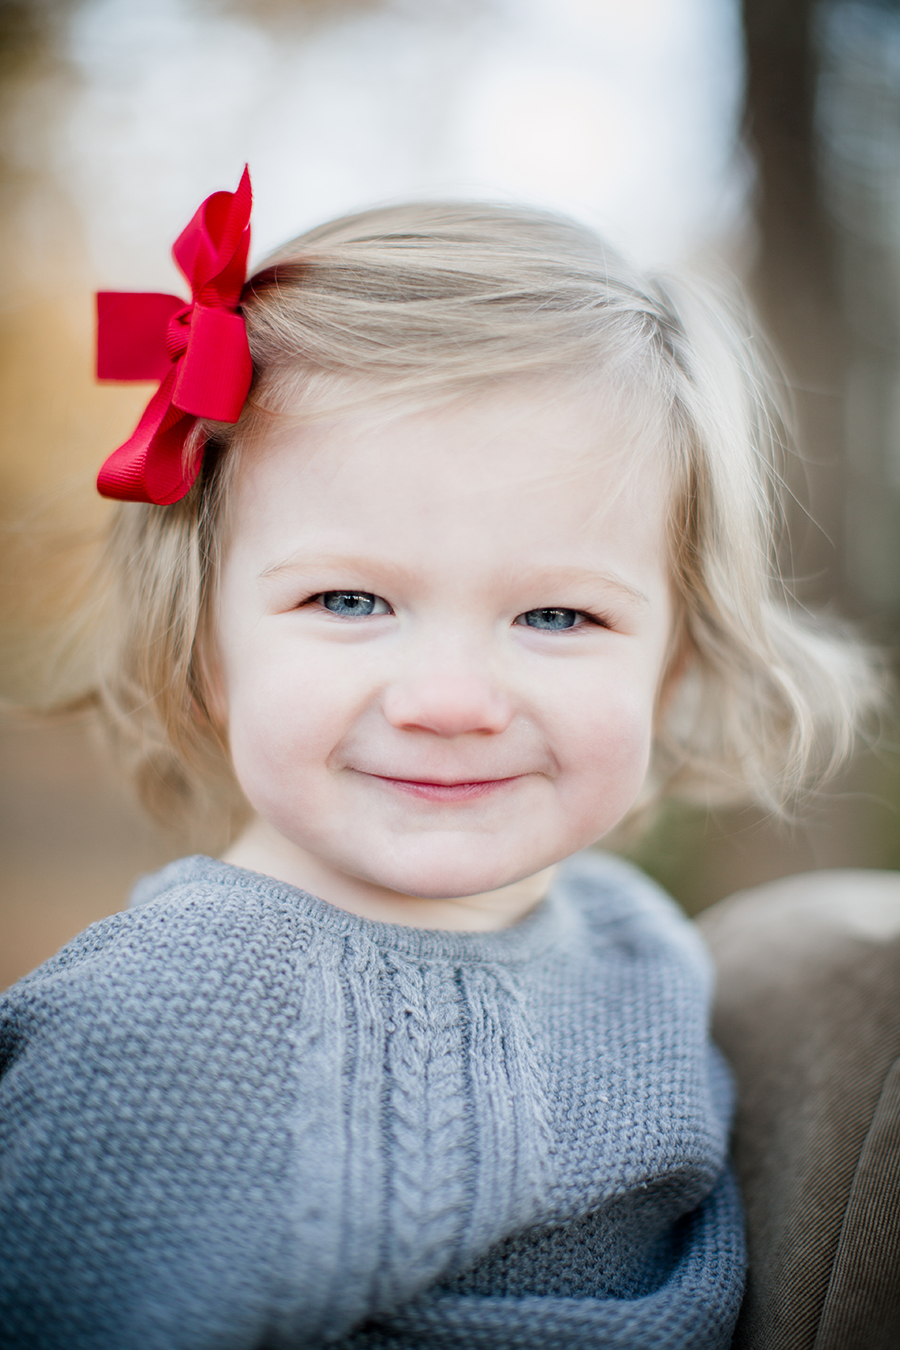 Smiling with red bows by Knoxville Wedding Photographer, Amanda May Photos.